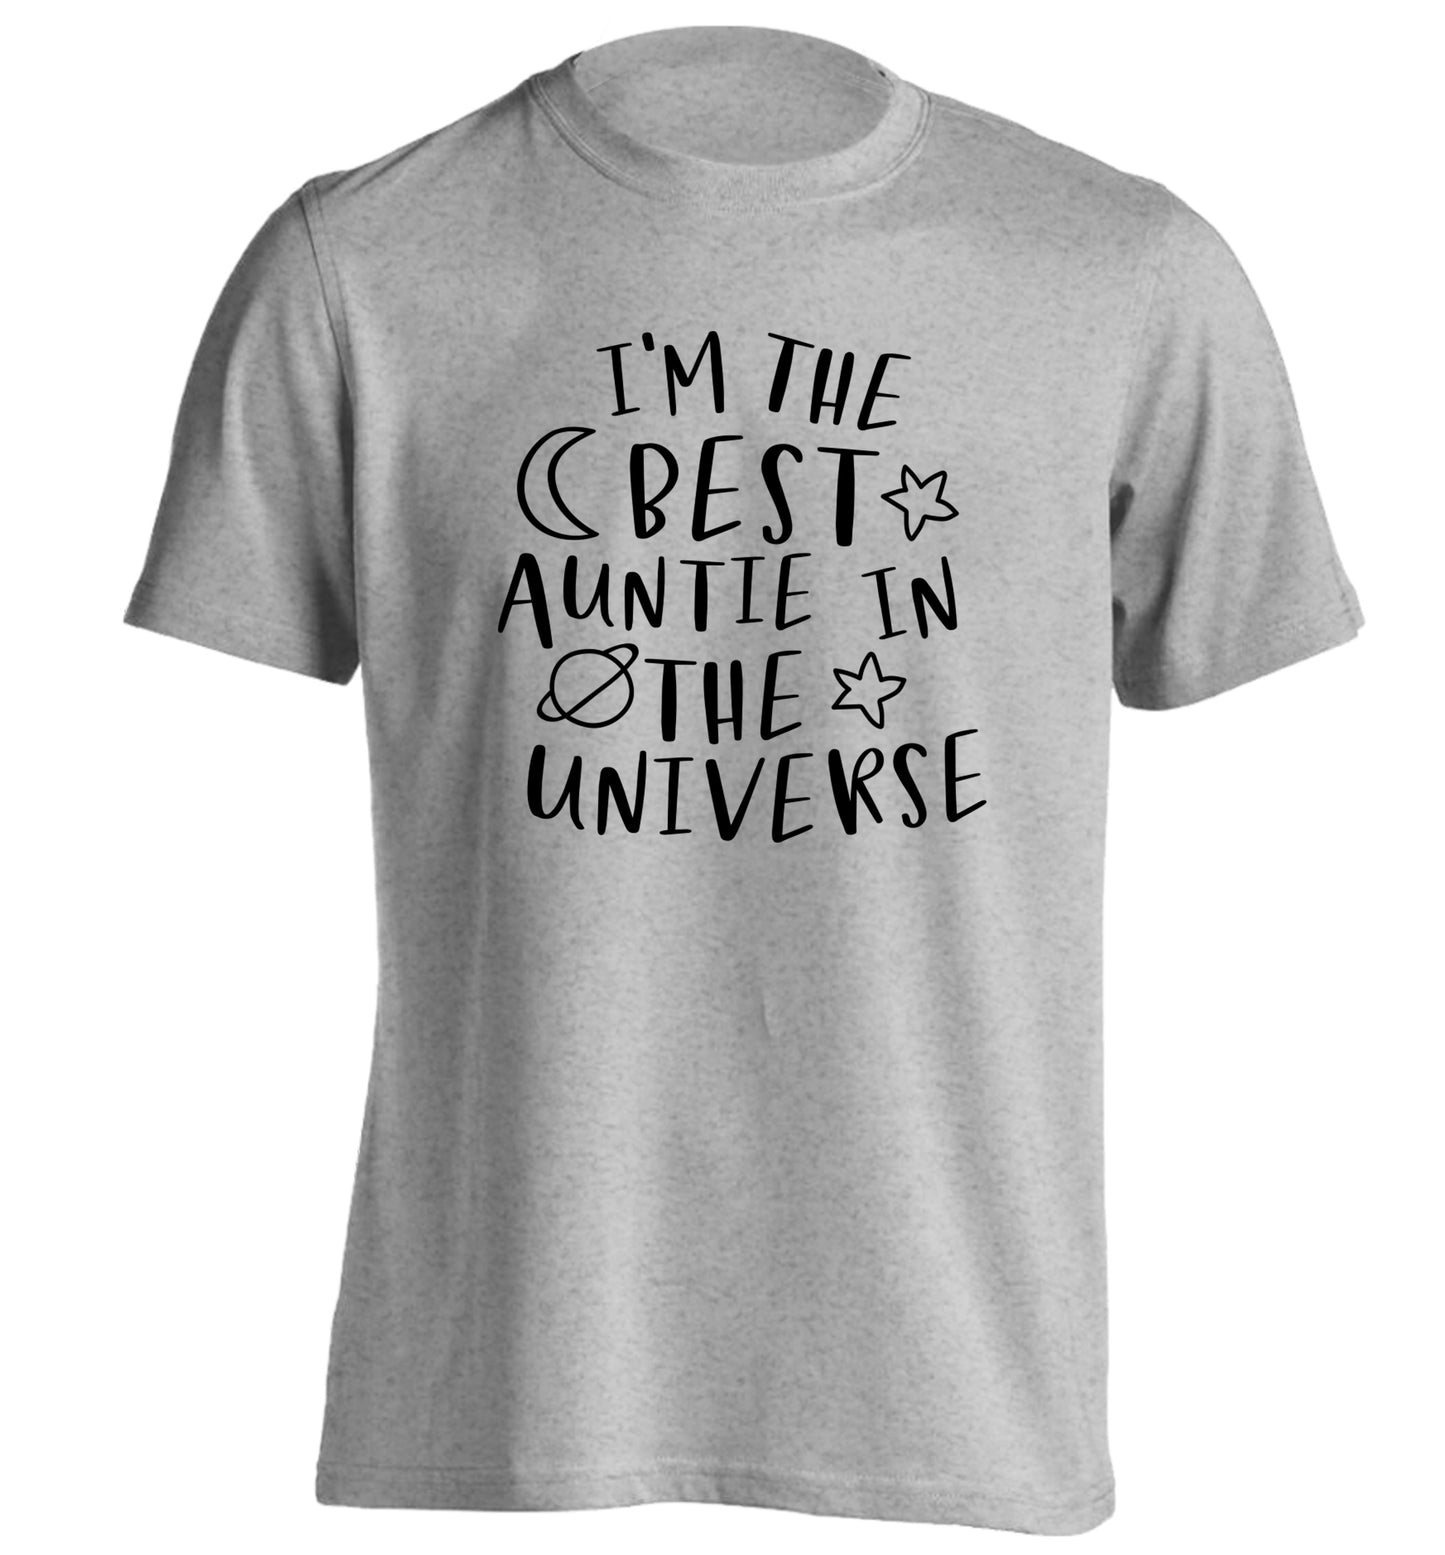 I'm the best auntie in the universe adults unisex grey Tshirt 2XL